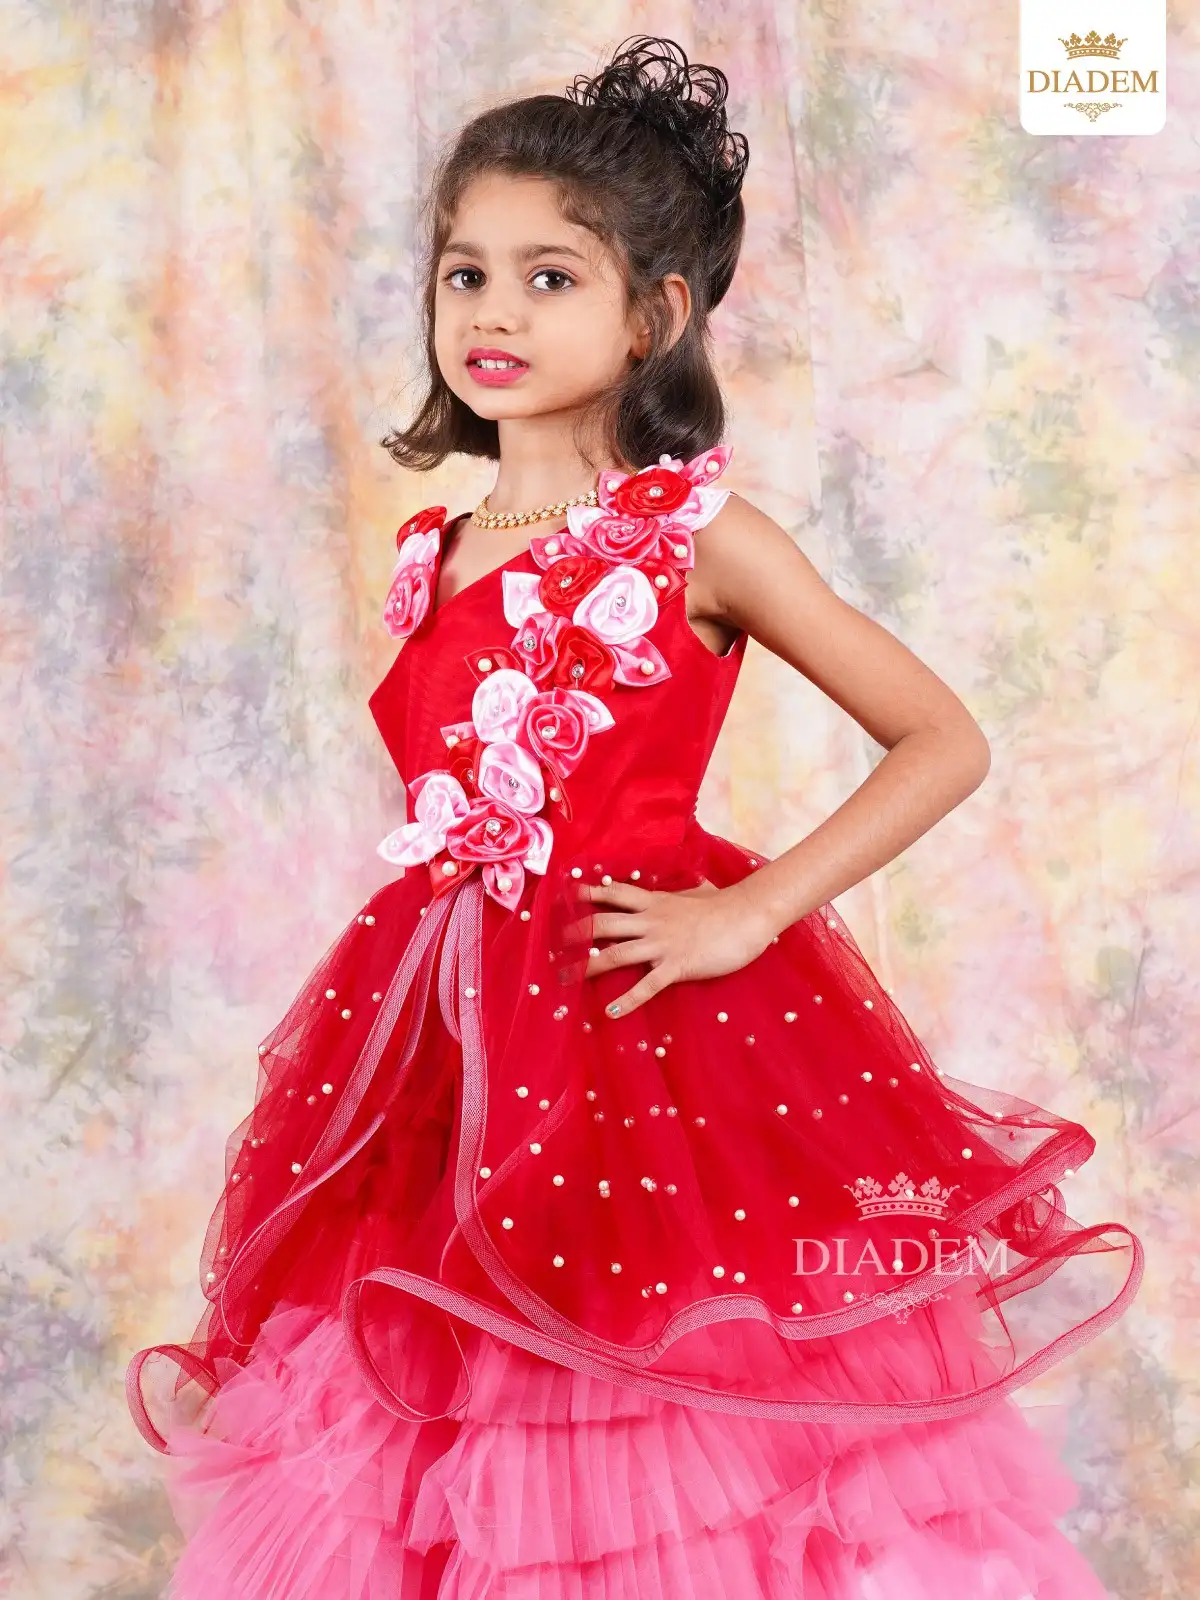 Scarlet Red Gown Embellished In Beads And Floral Design With Ruffled Bottom